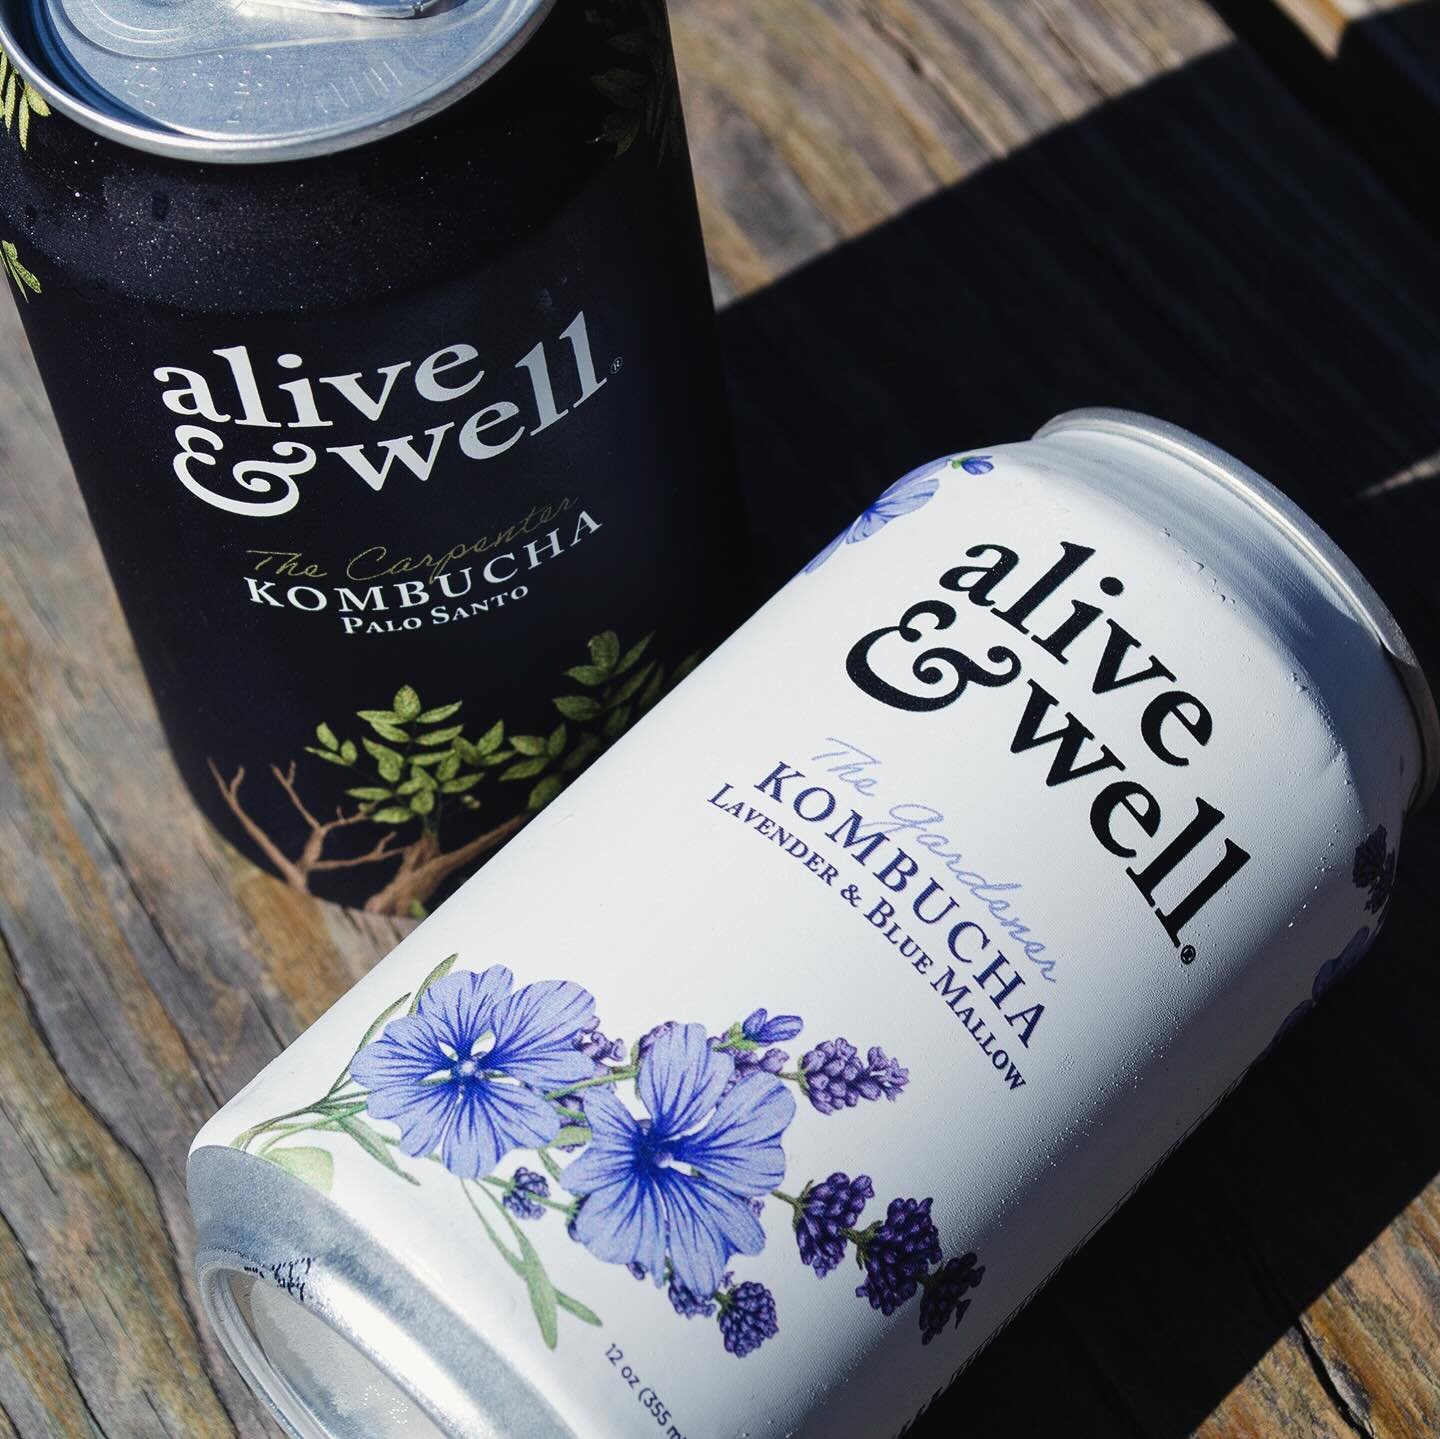 Refresh your mind, body, and soul with our new offerings from @aliveandwellkombucha✨😌✨

These delicious teas are made with live probiotics and premium, organic ingredients that not only taste great, but help improve your mood, relieve stress, sharpe